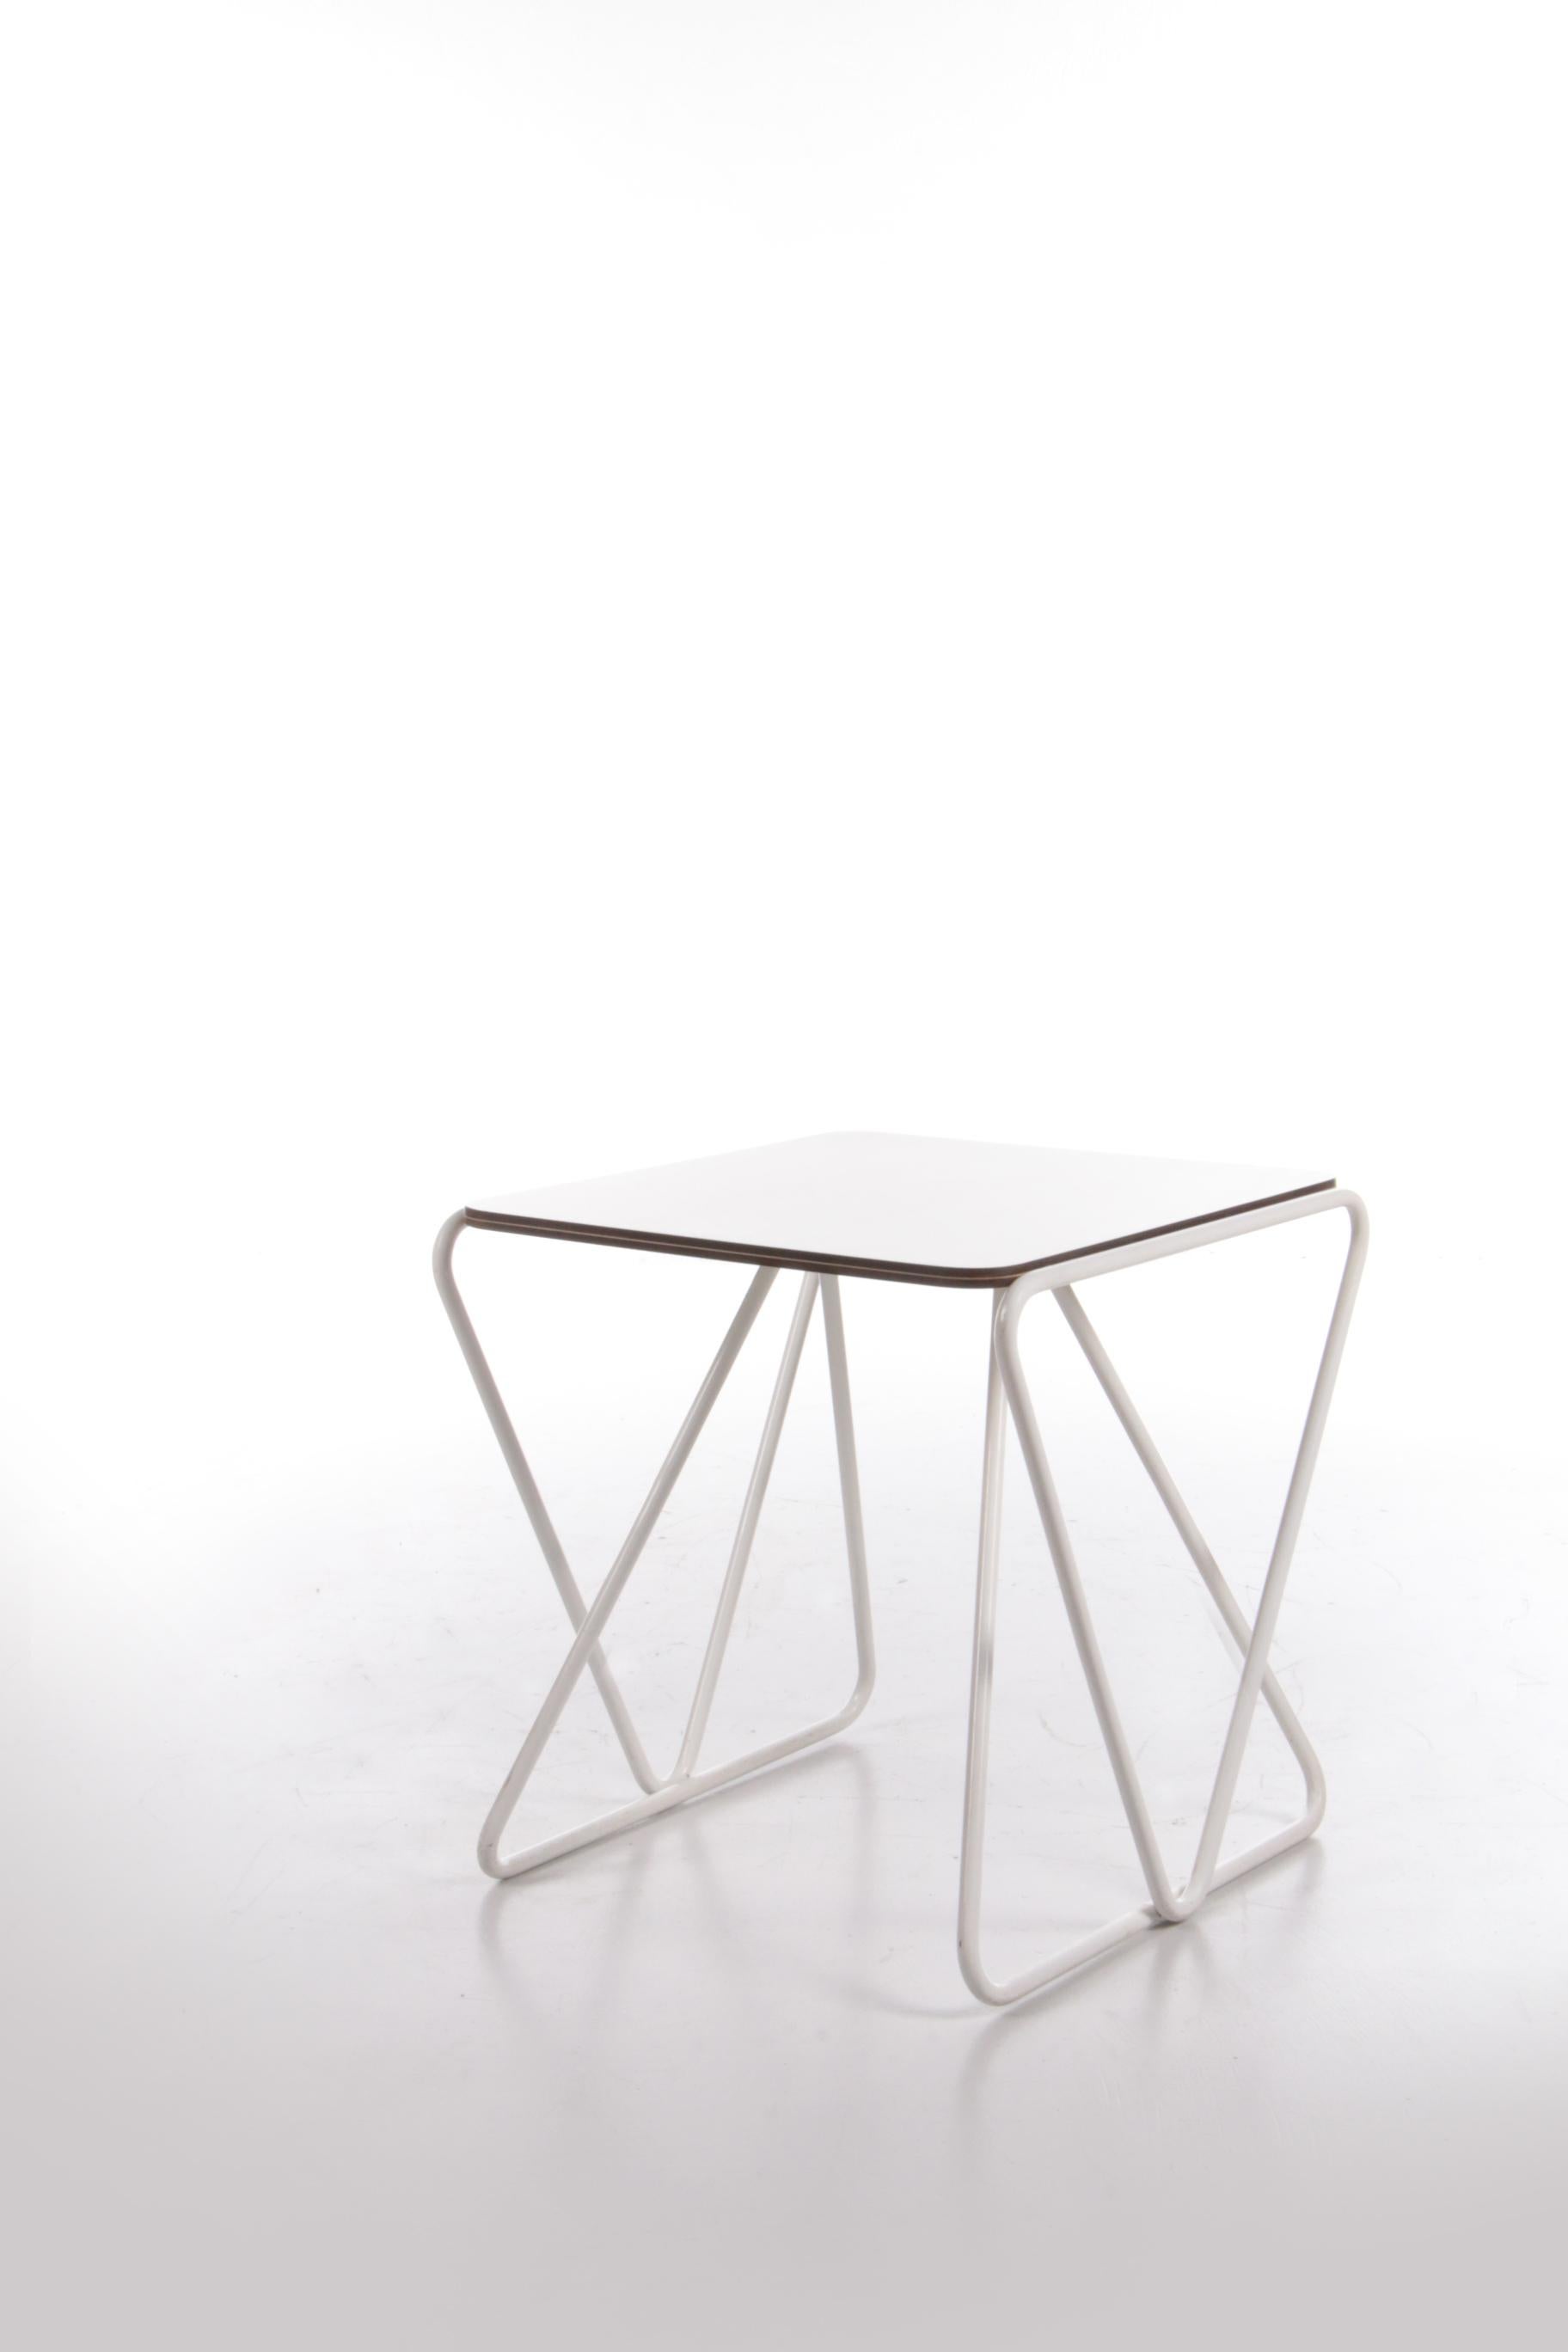 Walter Antonis Side Table for I-Form Holland, 1978 For Sale 2